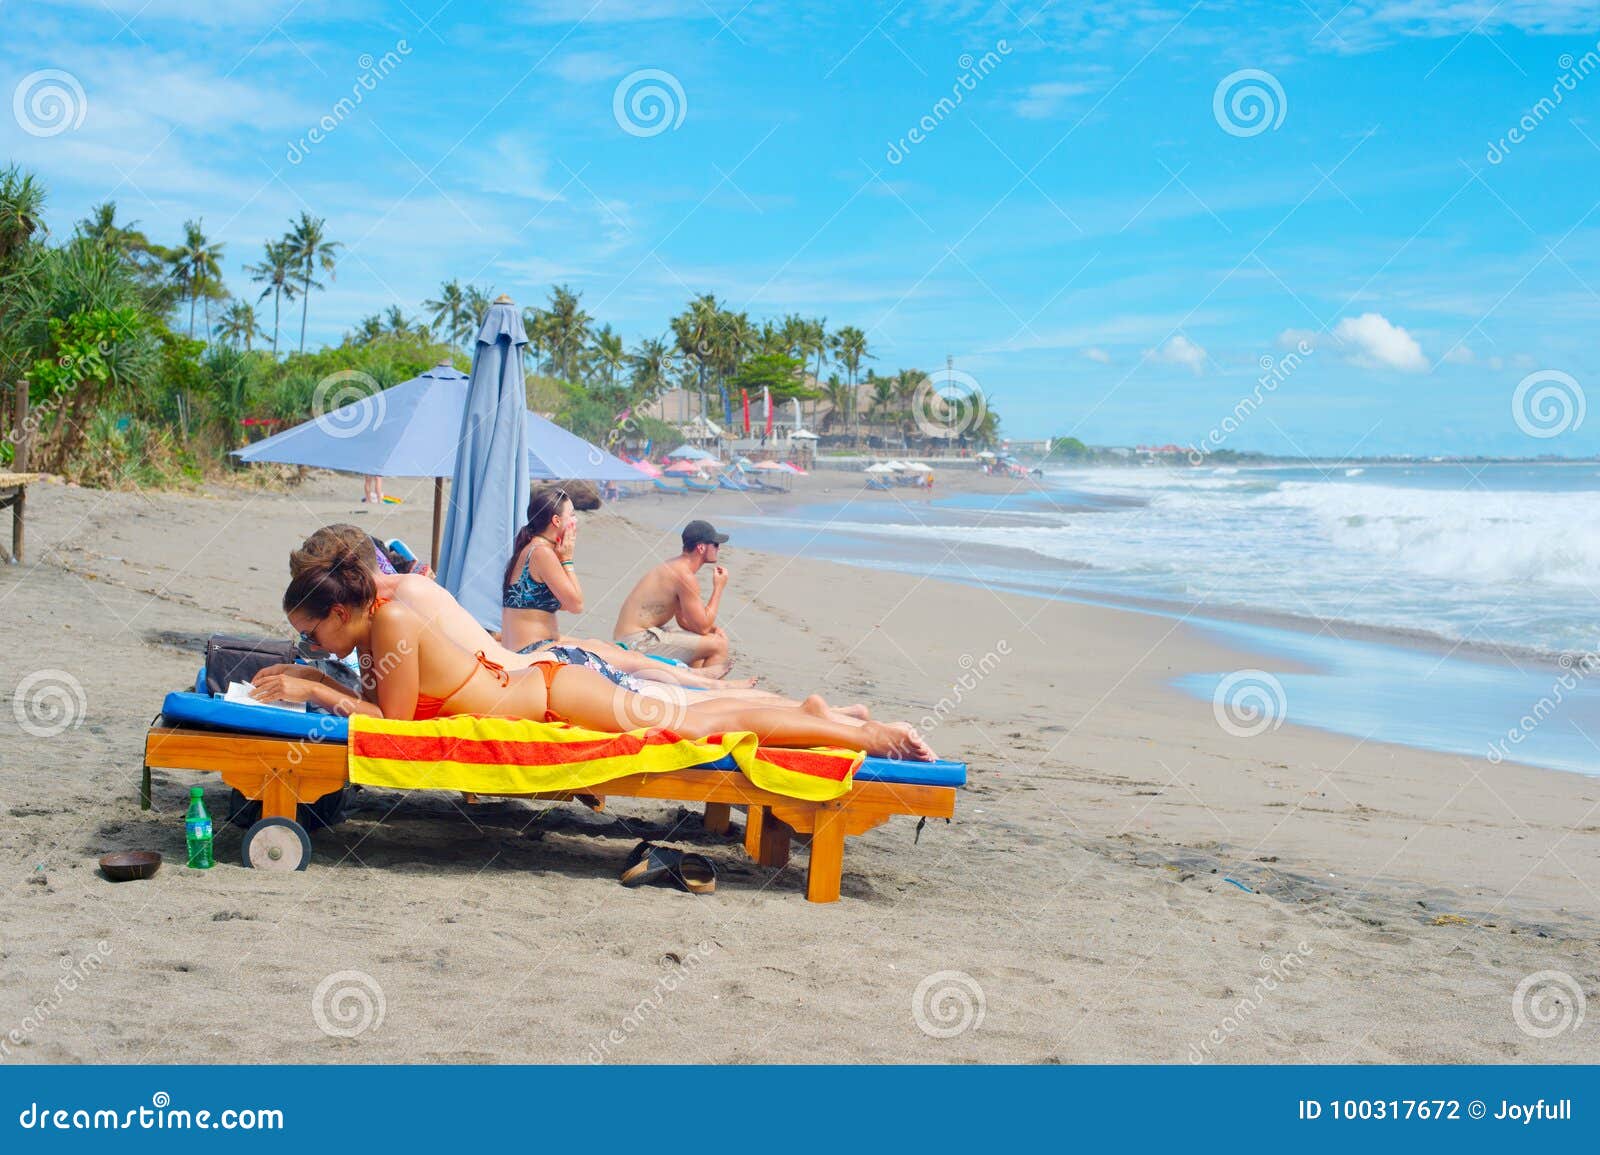 Couple On Tropical Beach. Bali Editorial Photography - Image of couple